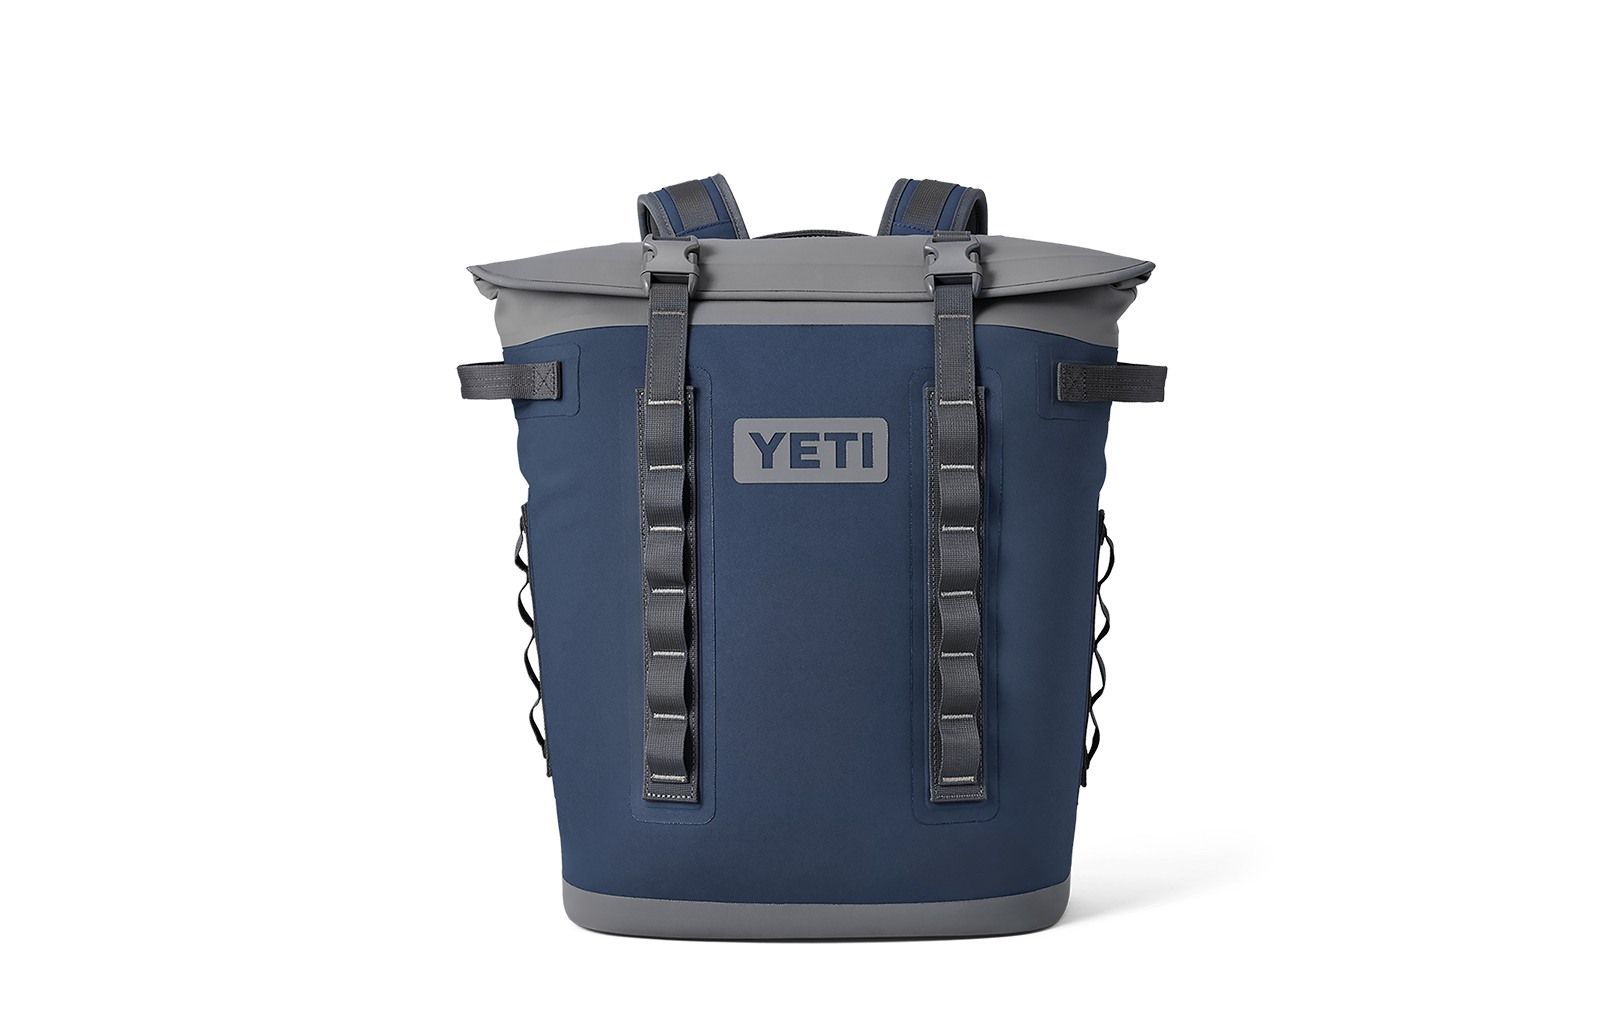 YETI Hopper M30 Insulated Bag Cooler, Coral at